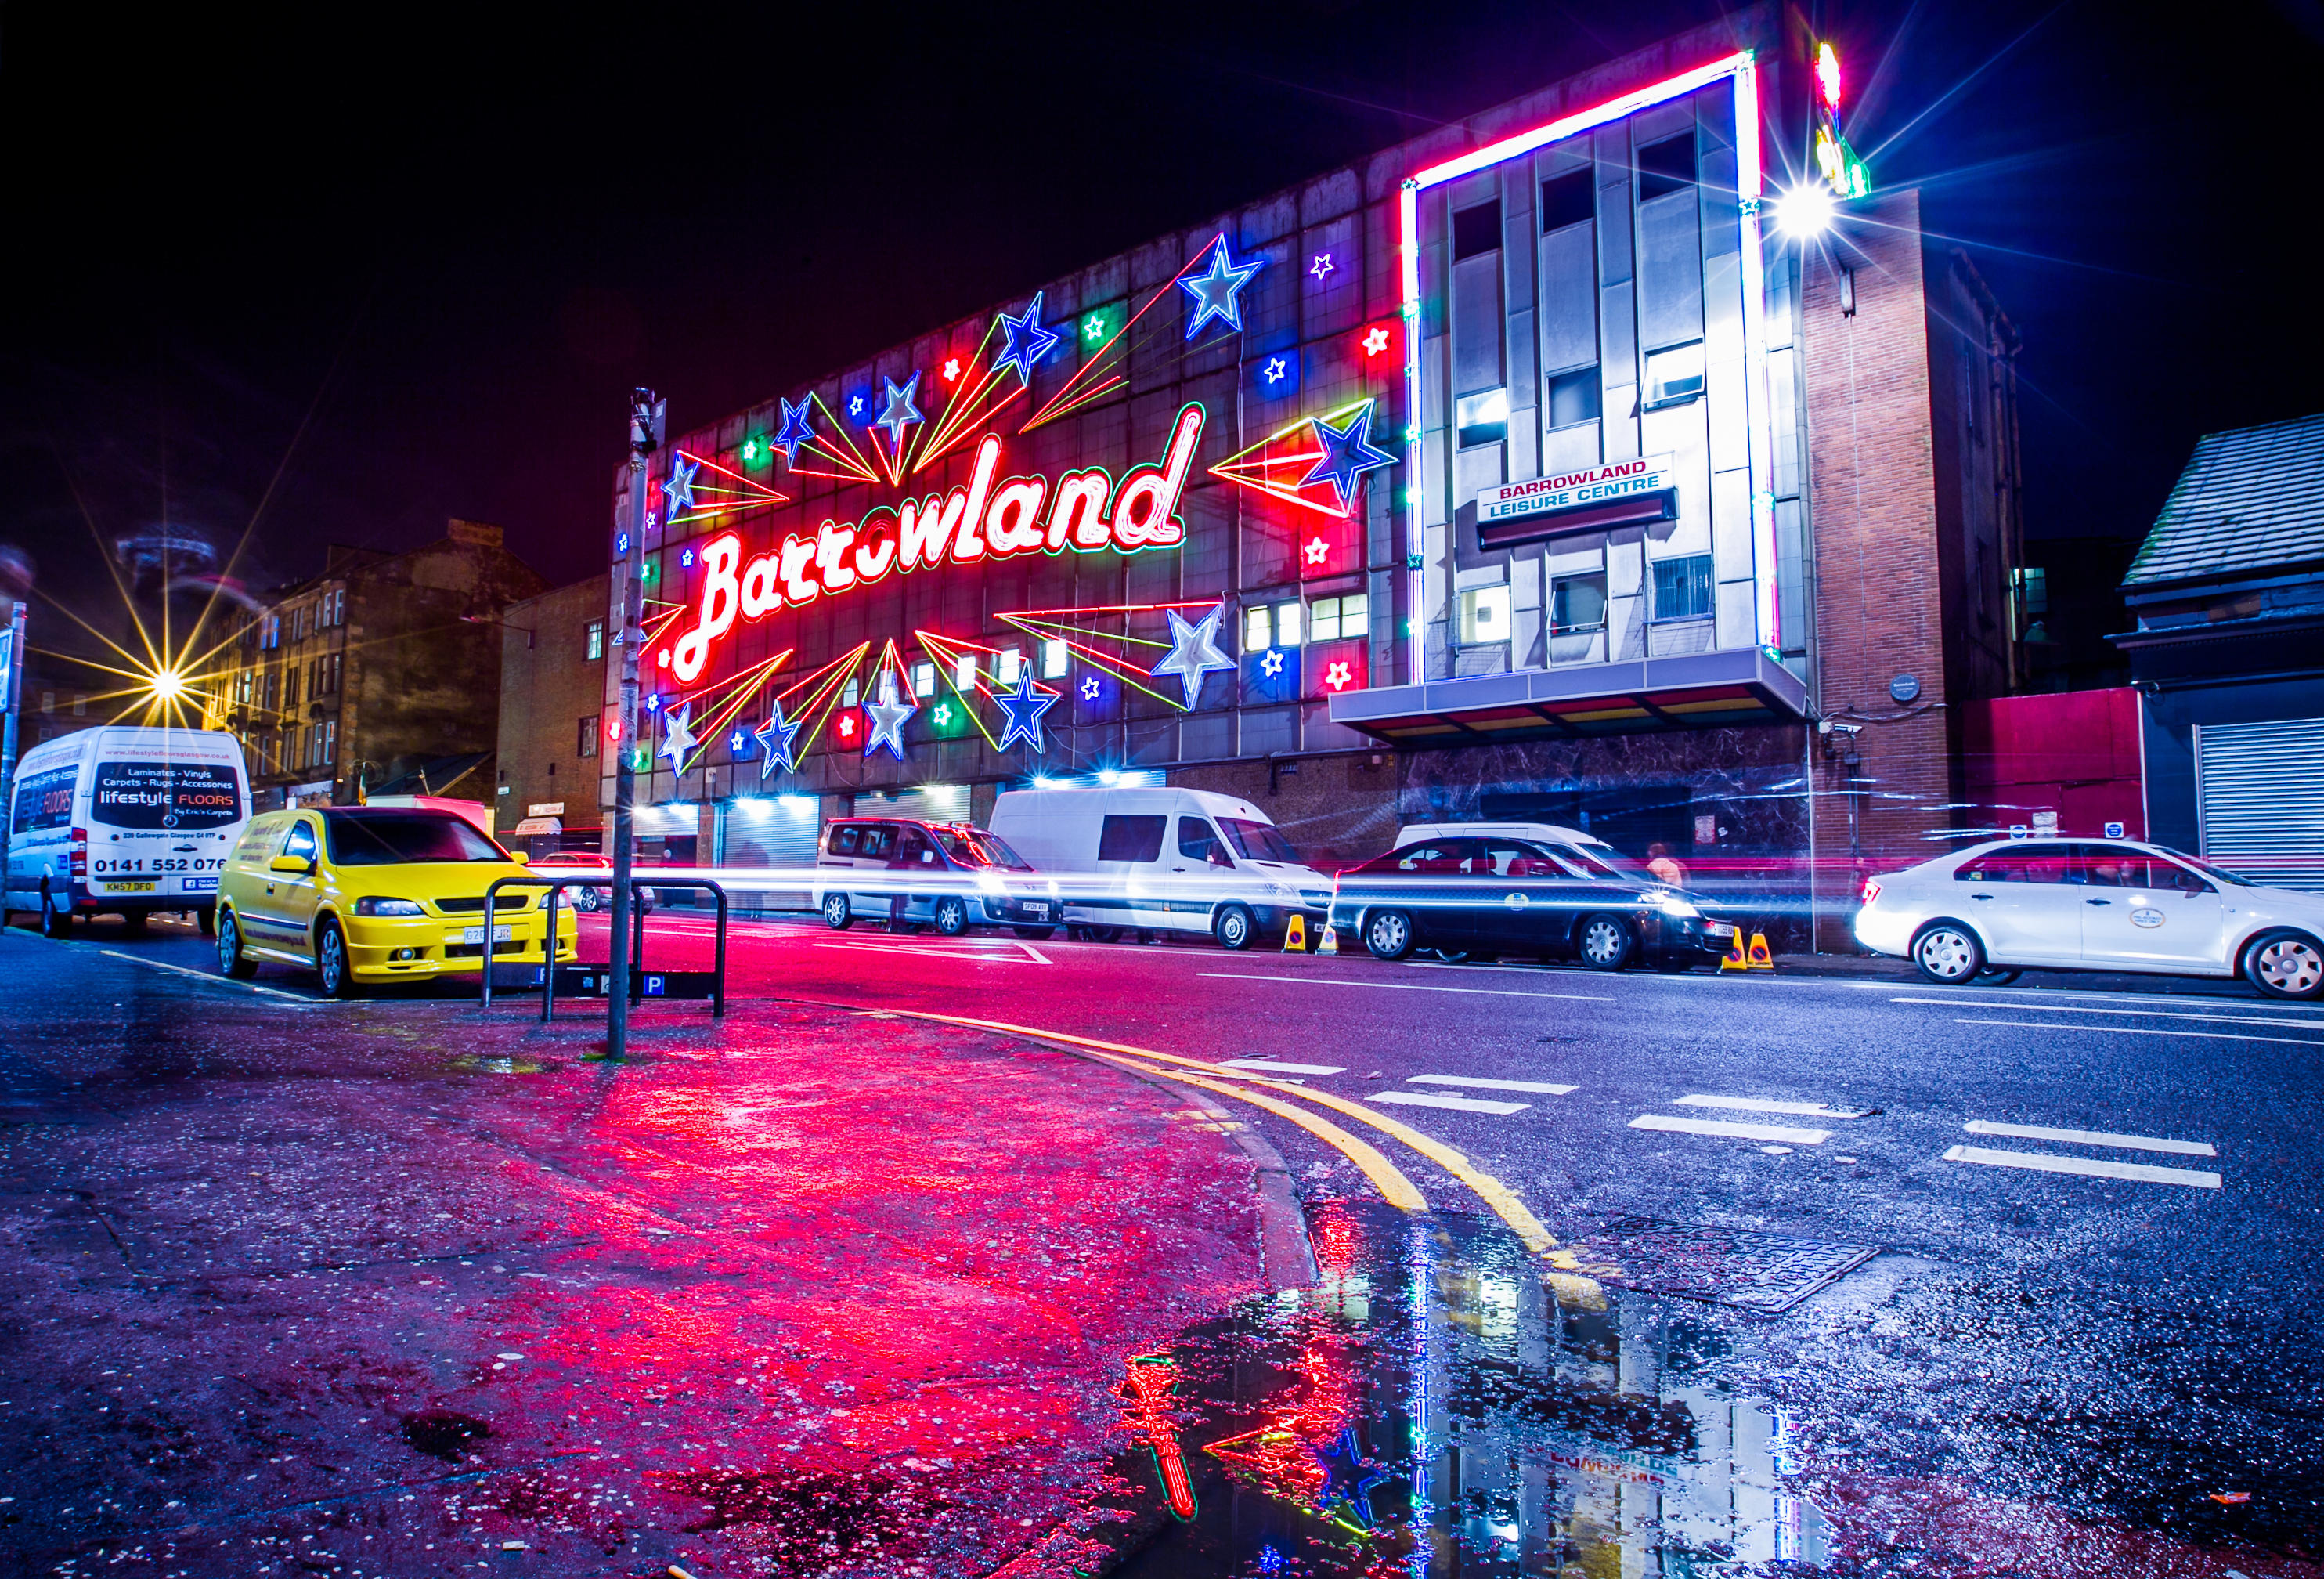 The Barrowland, music venue in Glasgow at night.